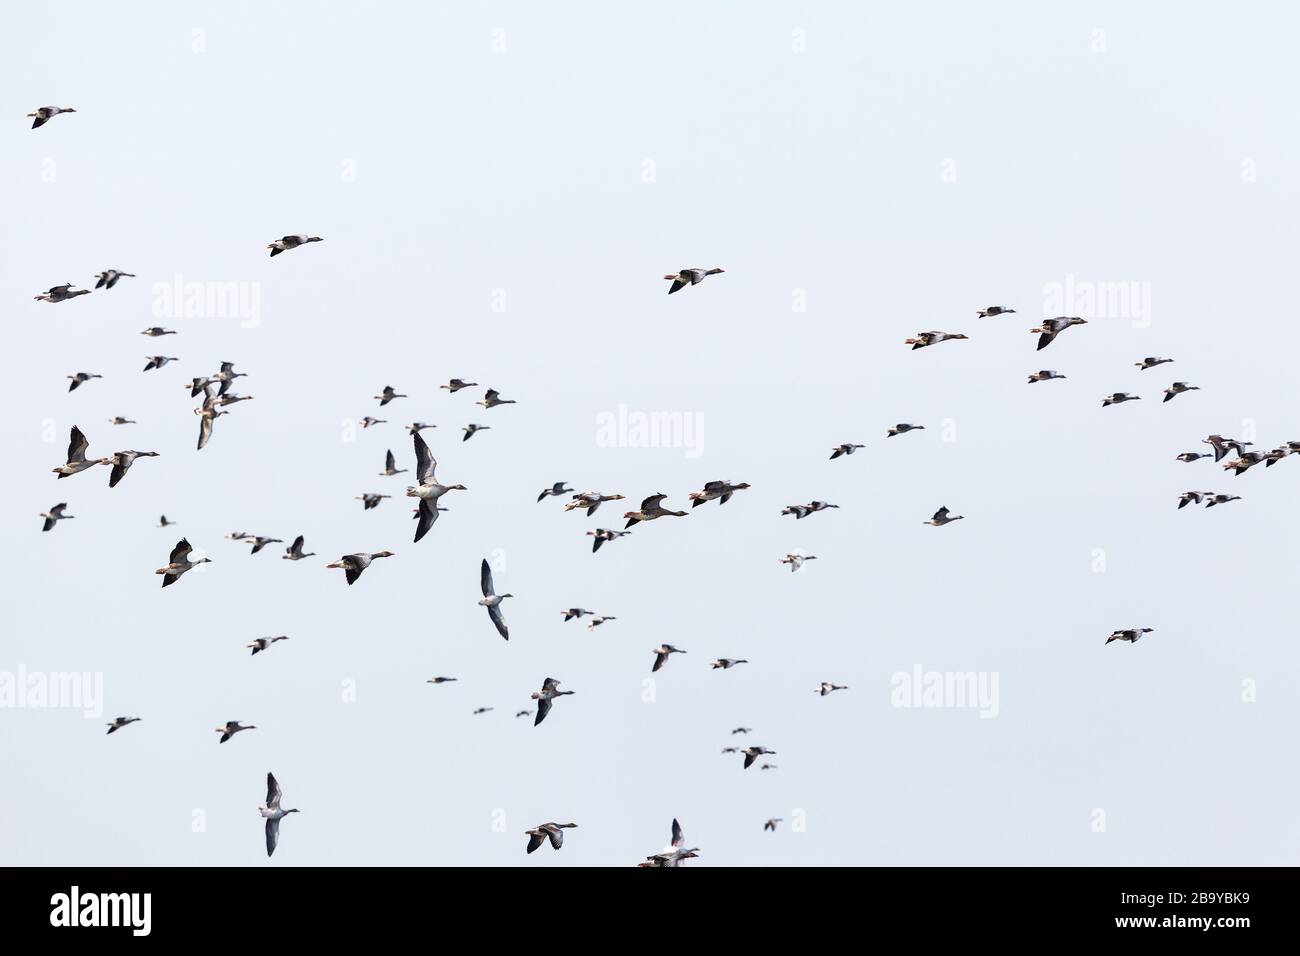 Greylag geese bird migration in the sky Stock Photo